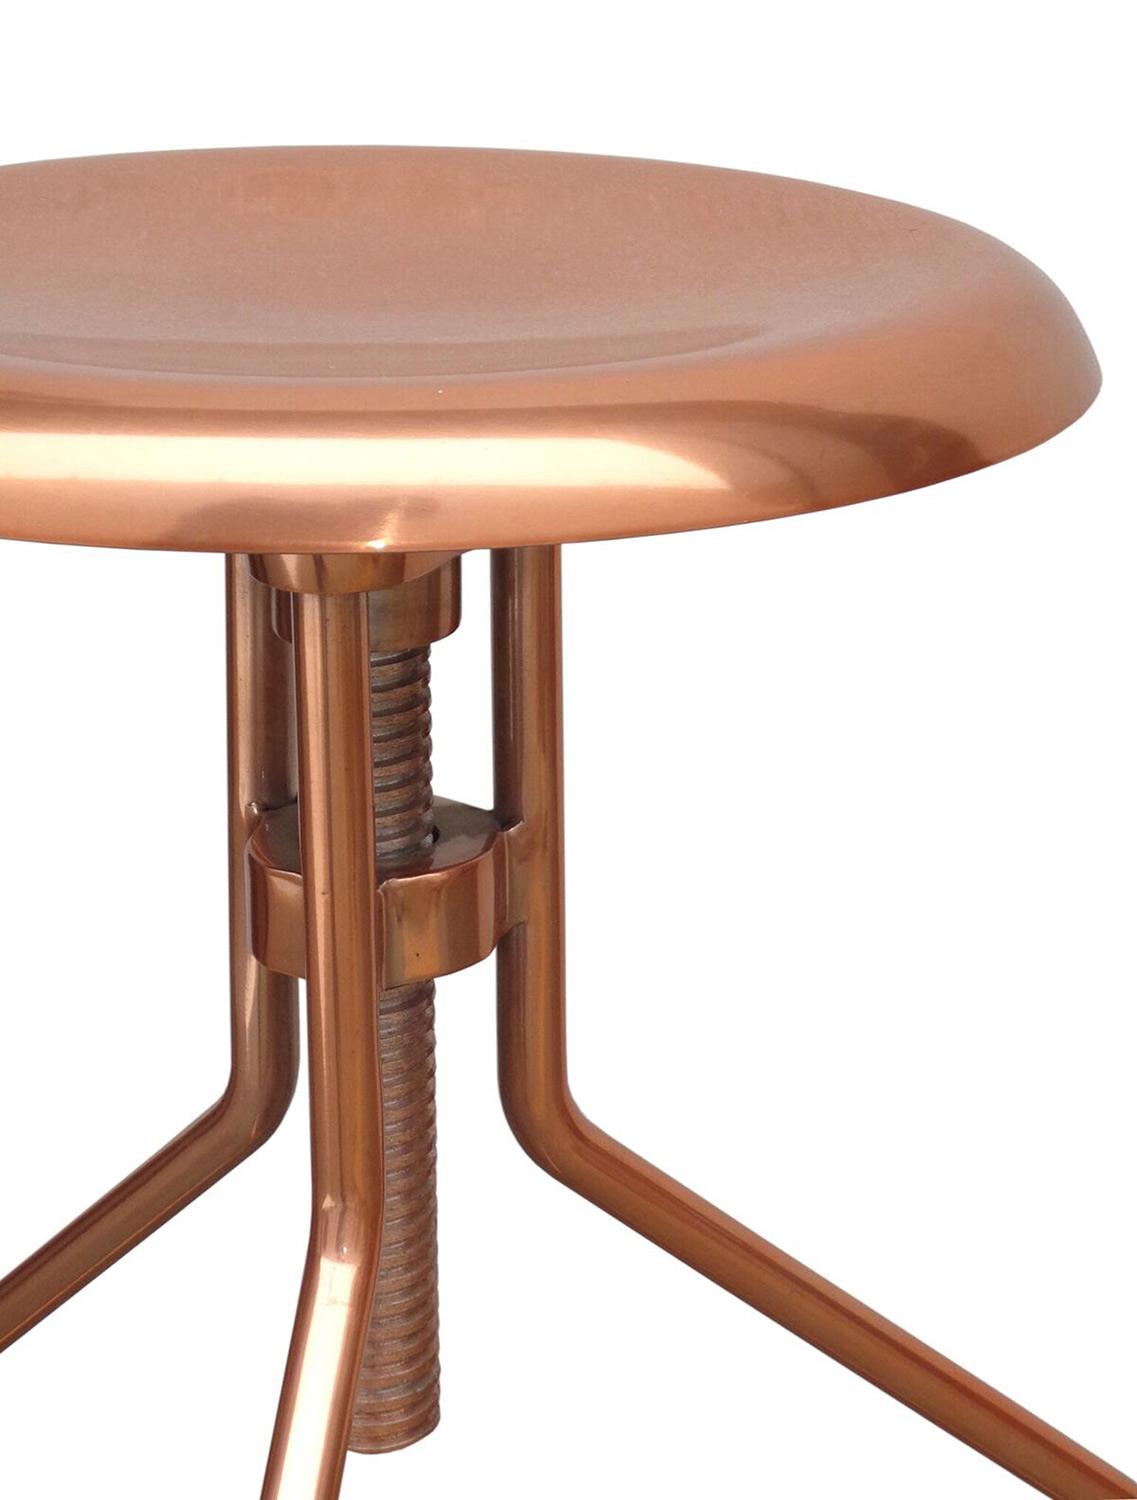 Ren-Wil Colter Stool - Copper